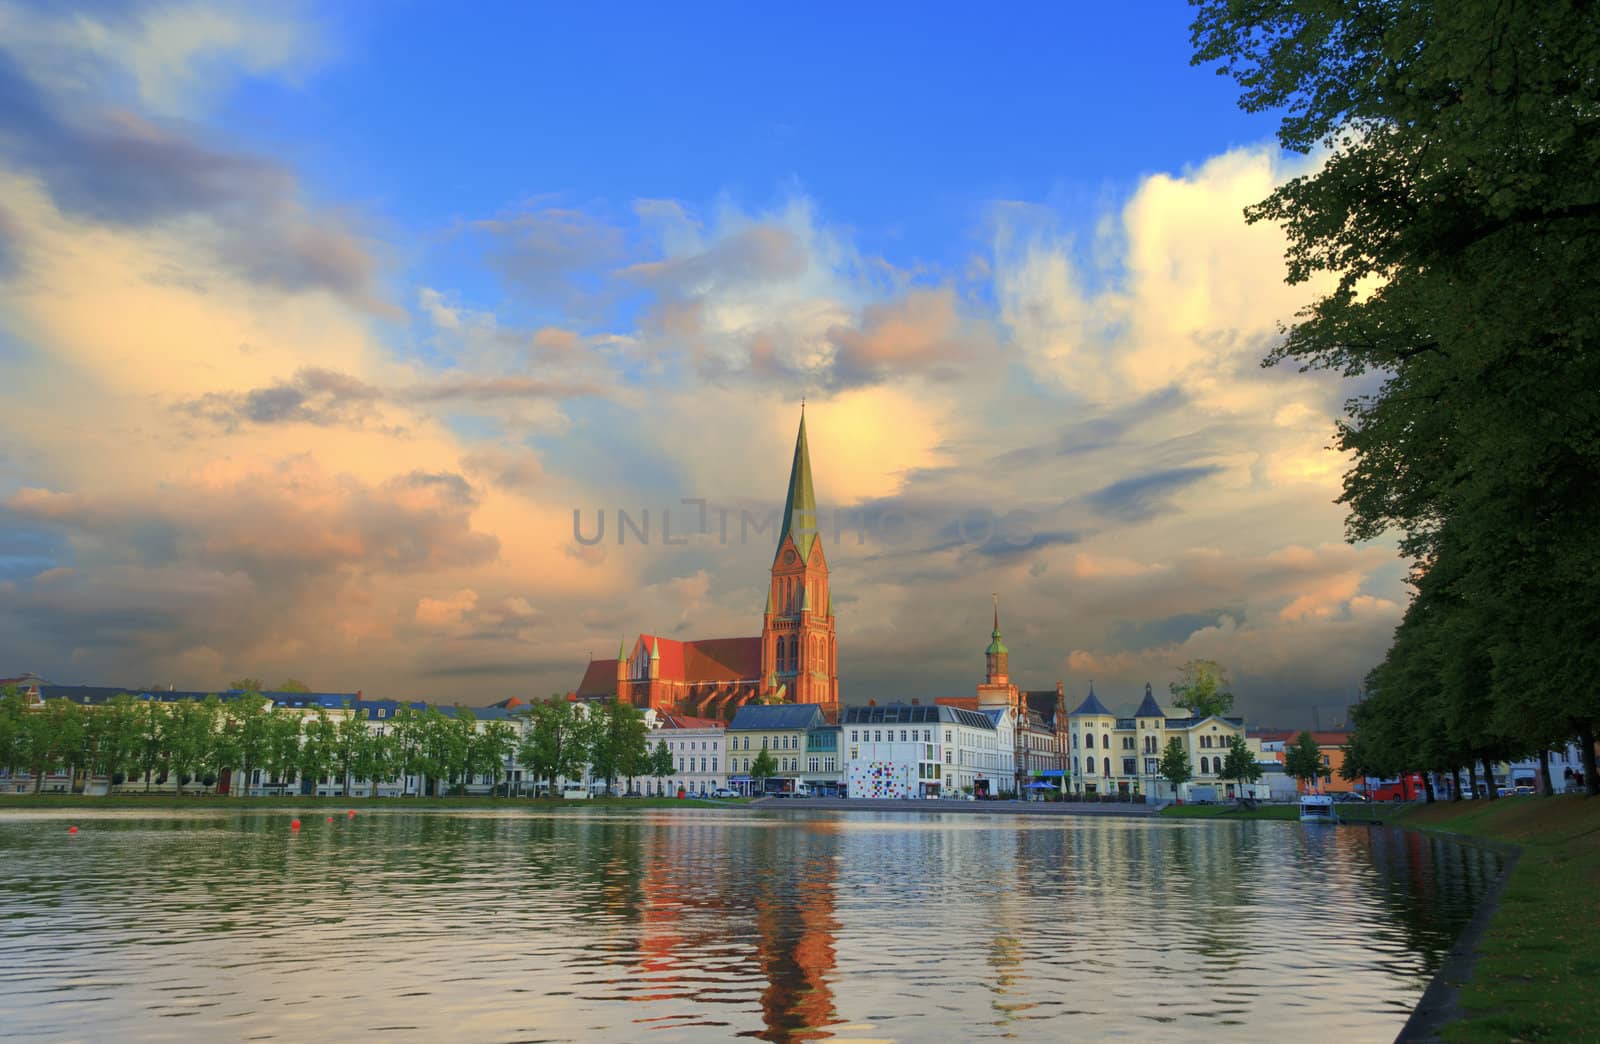 The Schwerin Cathedral behind the Pfaffenteich. HDR image, very vibrant colors.